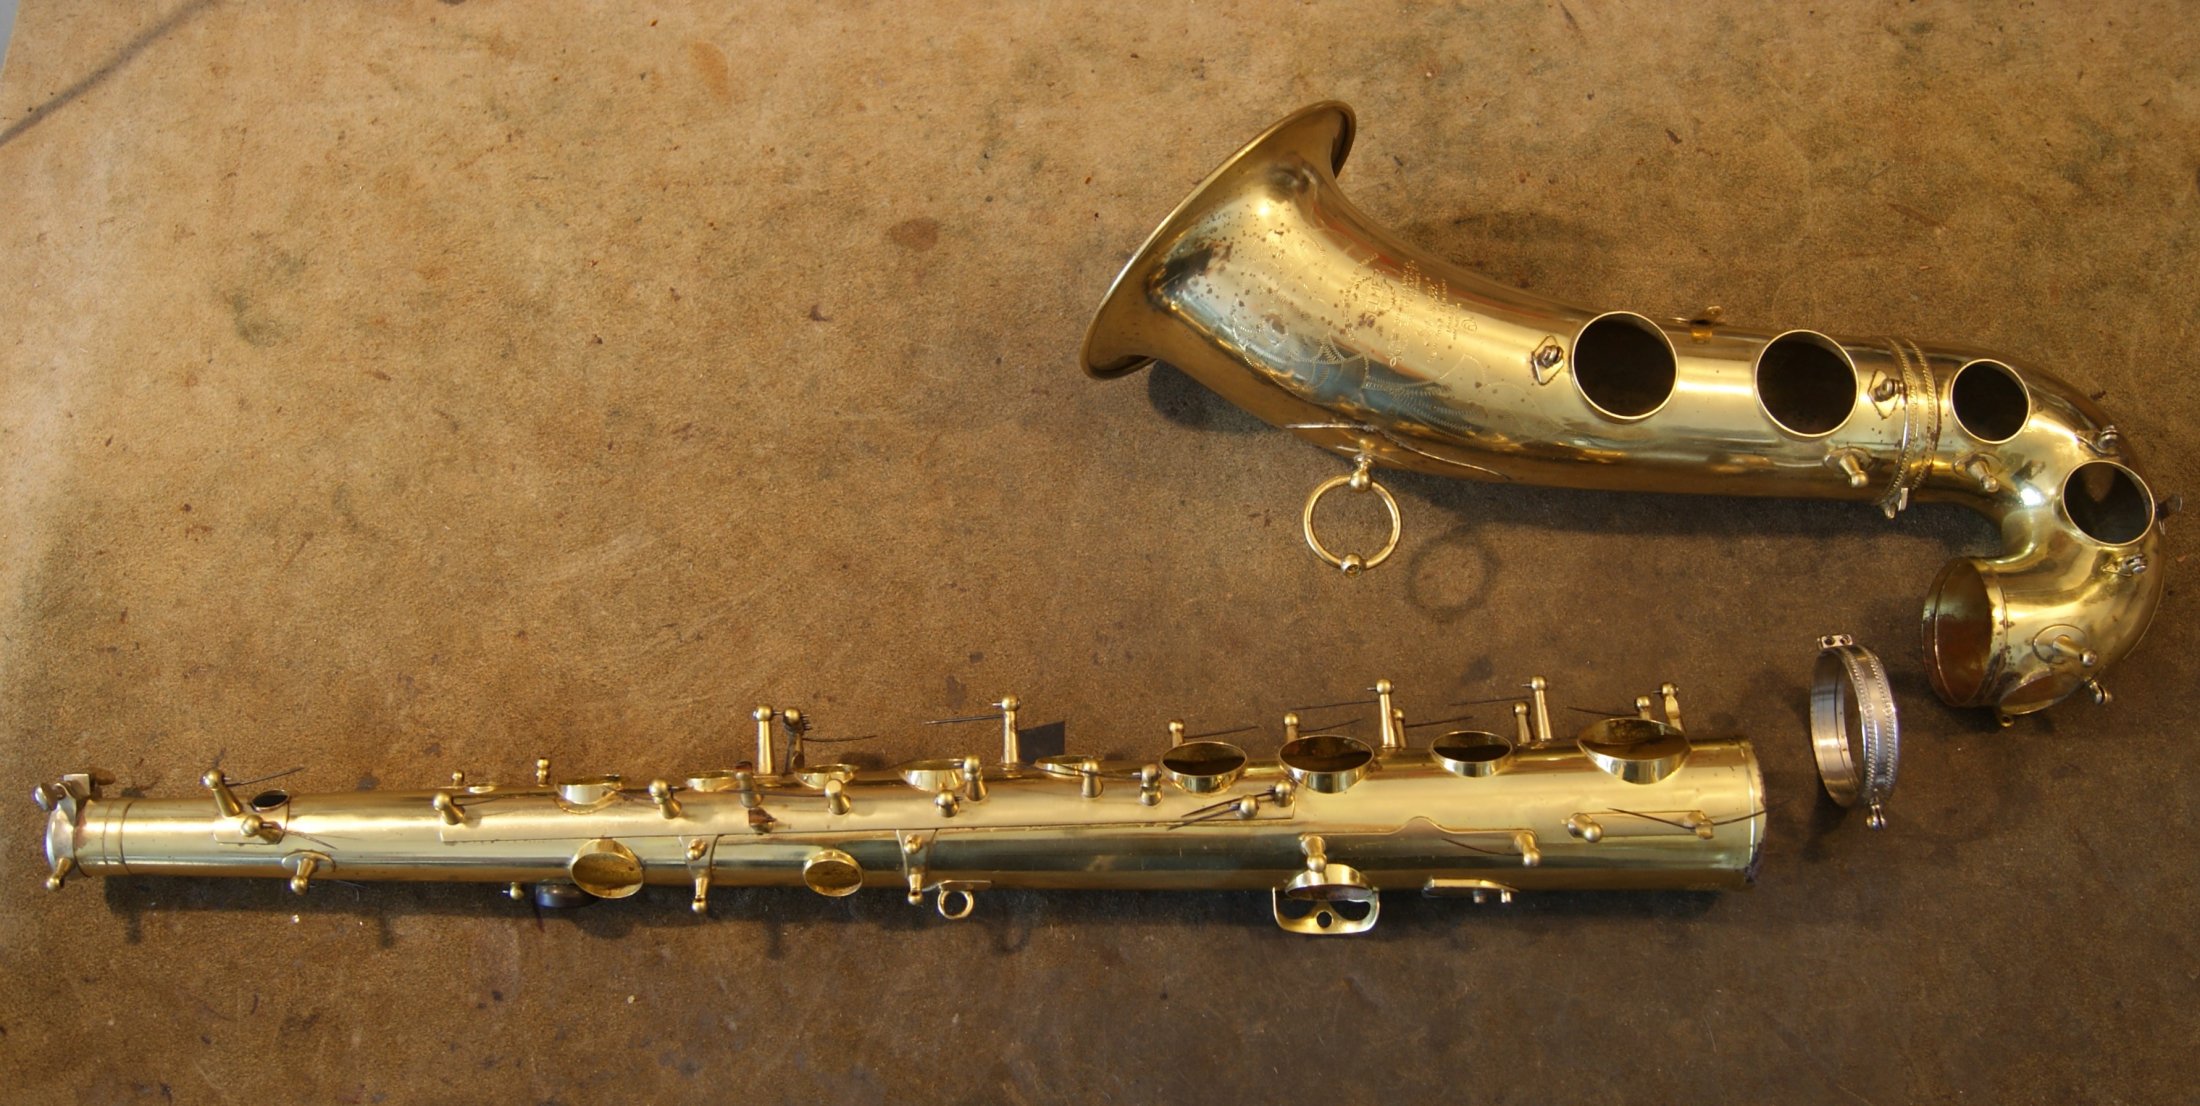 Disassembled saxophone body for cleaning, dents repair & complete springs replacement